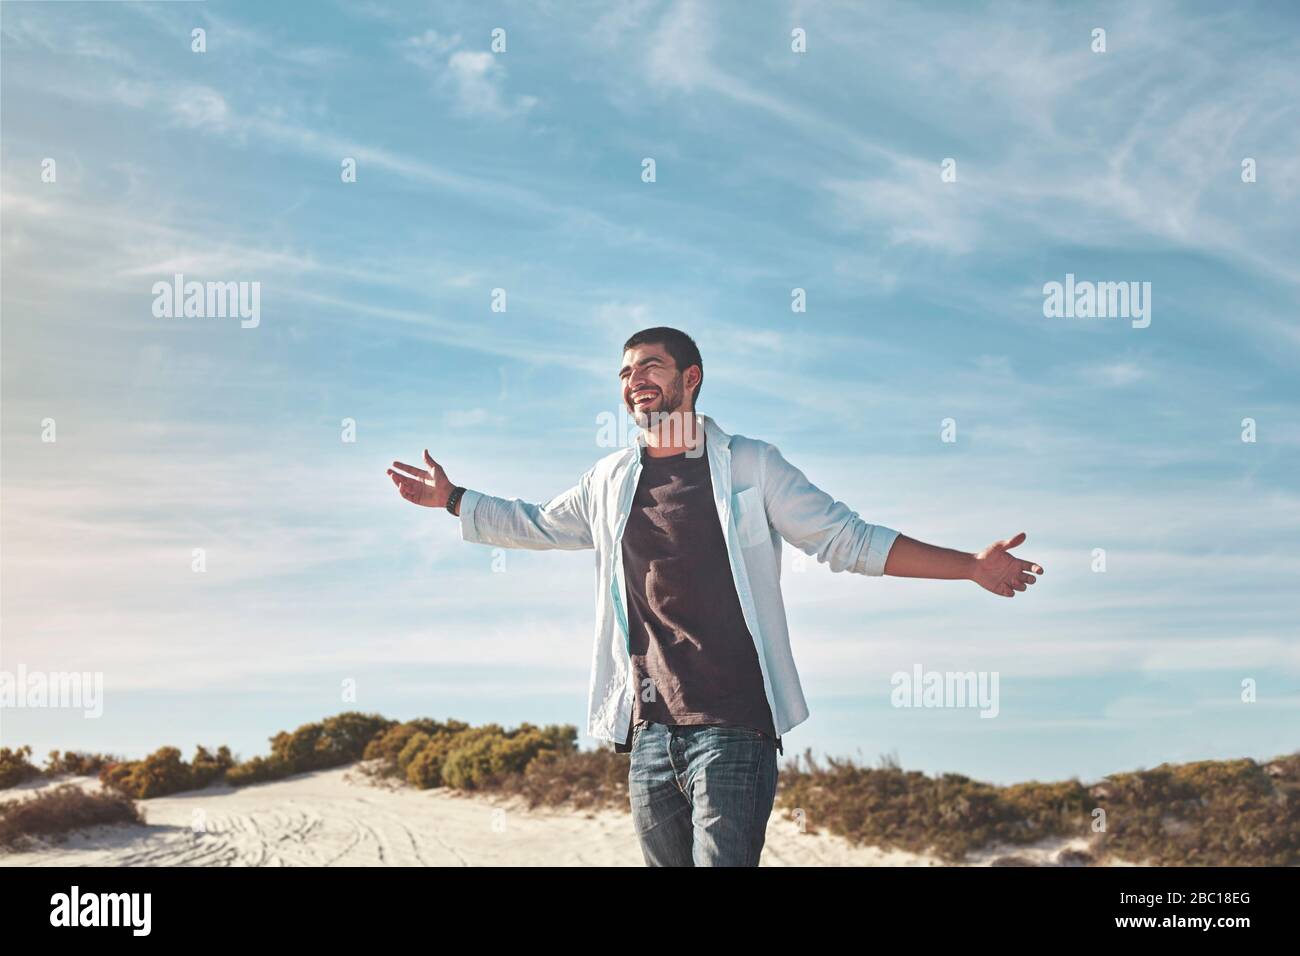 Exuberant young man with arms outstretched on sunny beach Stock Photo